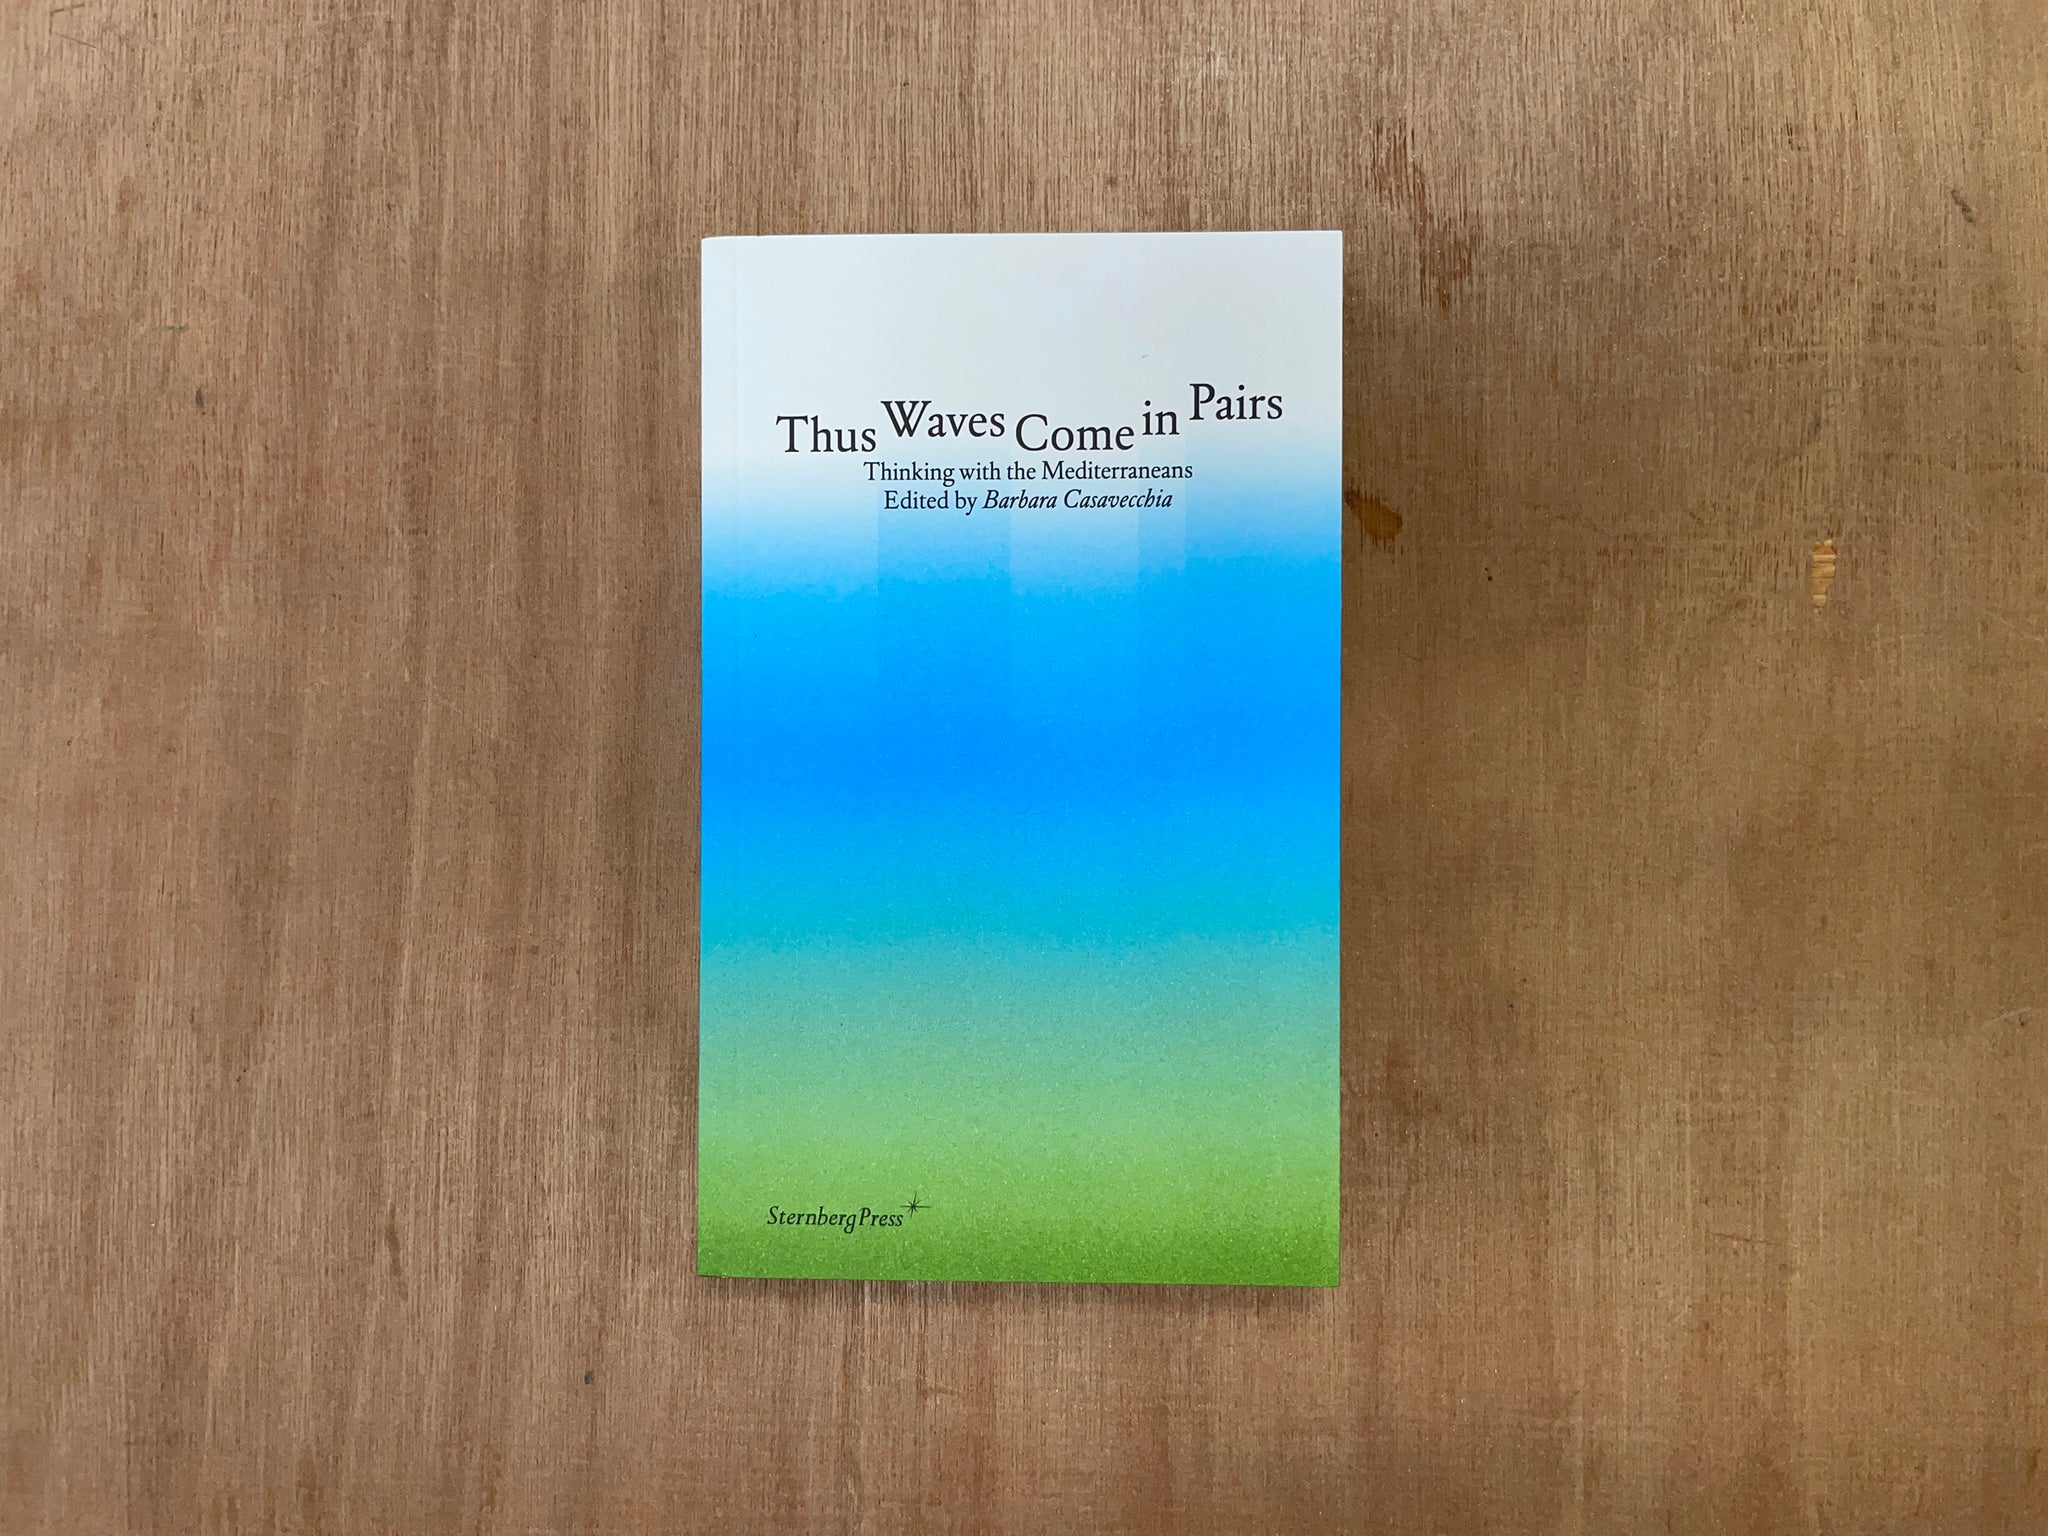 THUS WAVES COME IN PAIRS: THINKING WITH THE MEDITERRANEANS Edited by Barbara Casavecchia